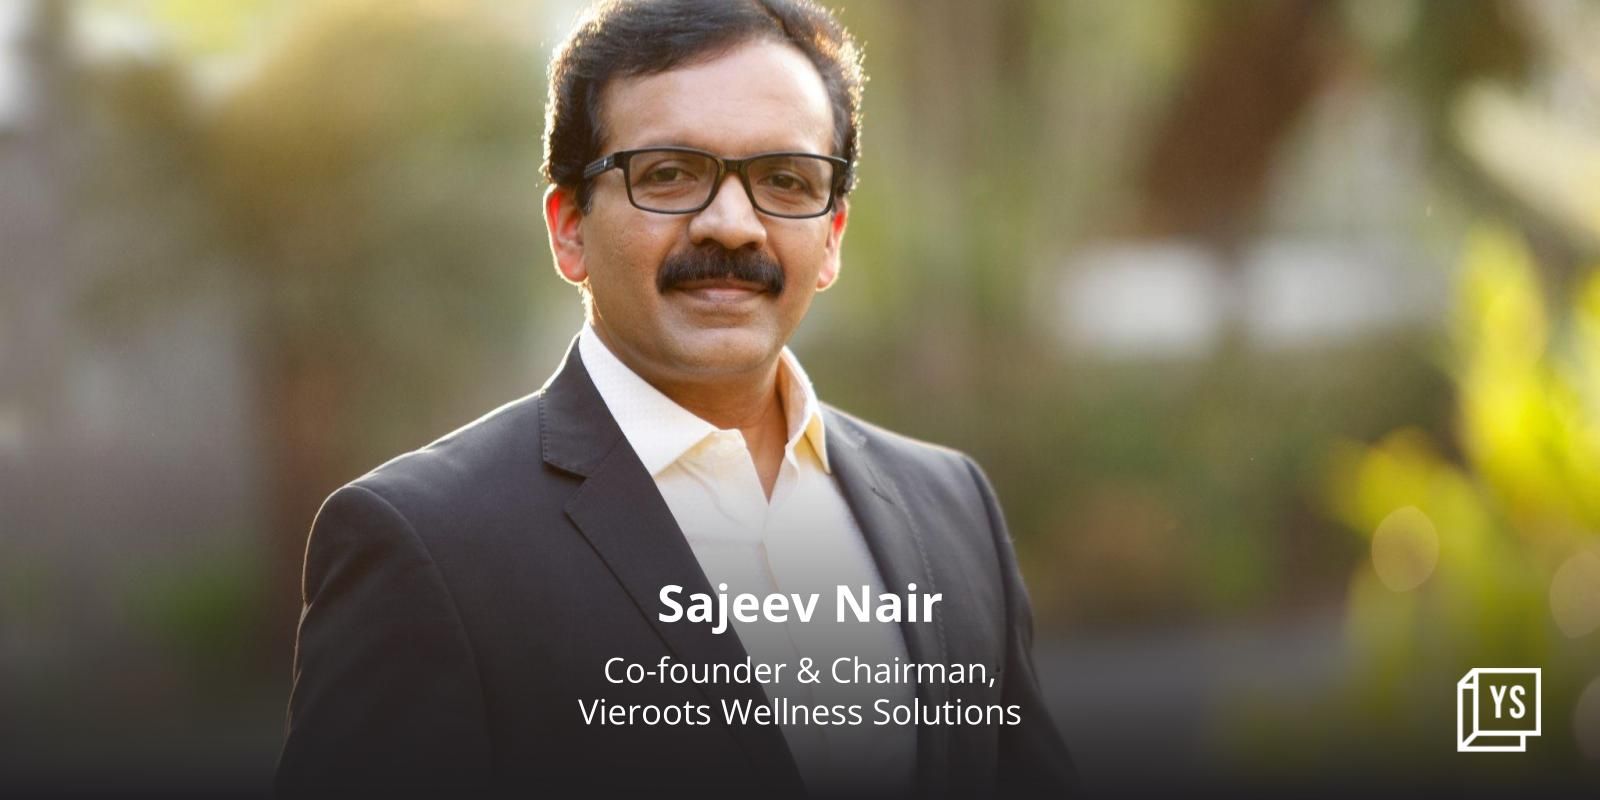 Vieroots uses genome testing to win over a growing tribe of wellness enthusiasts
